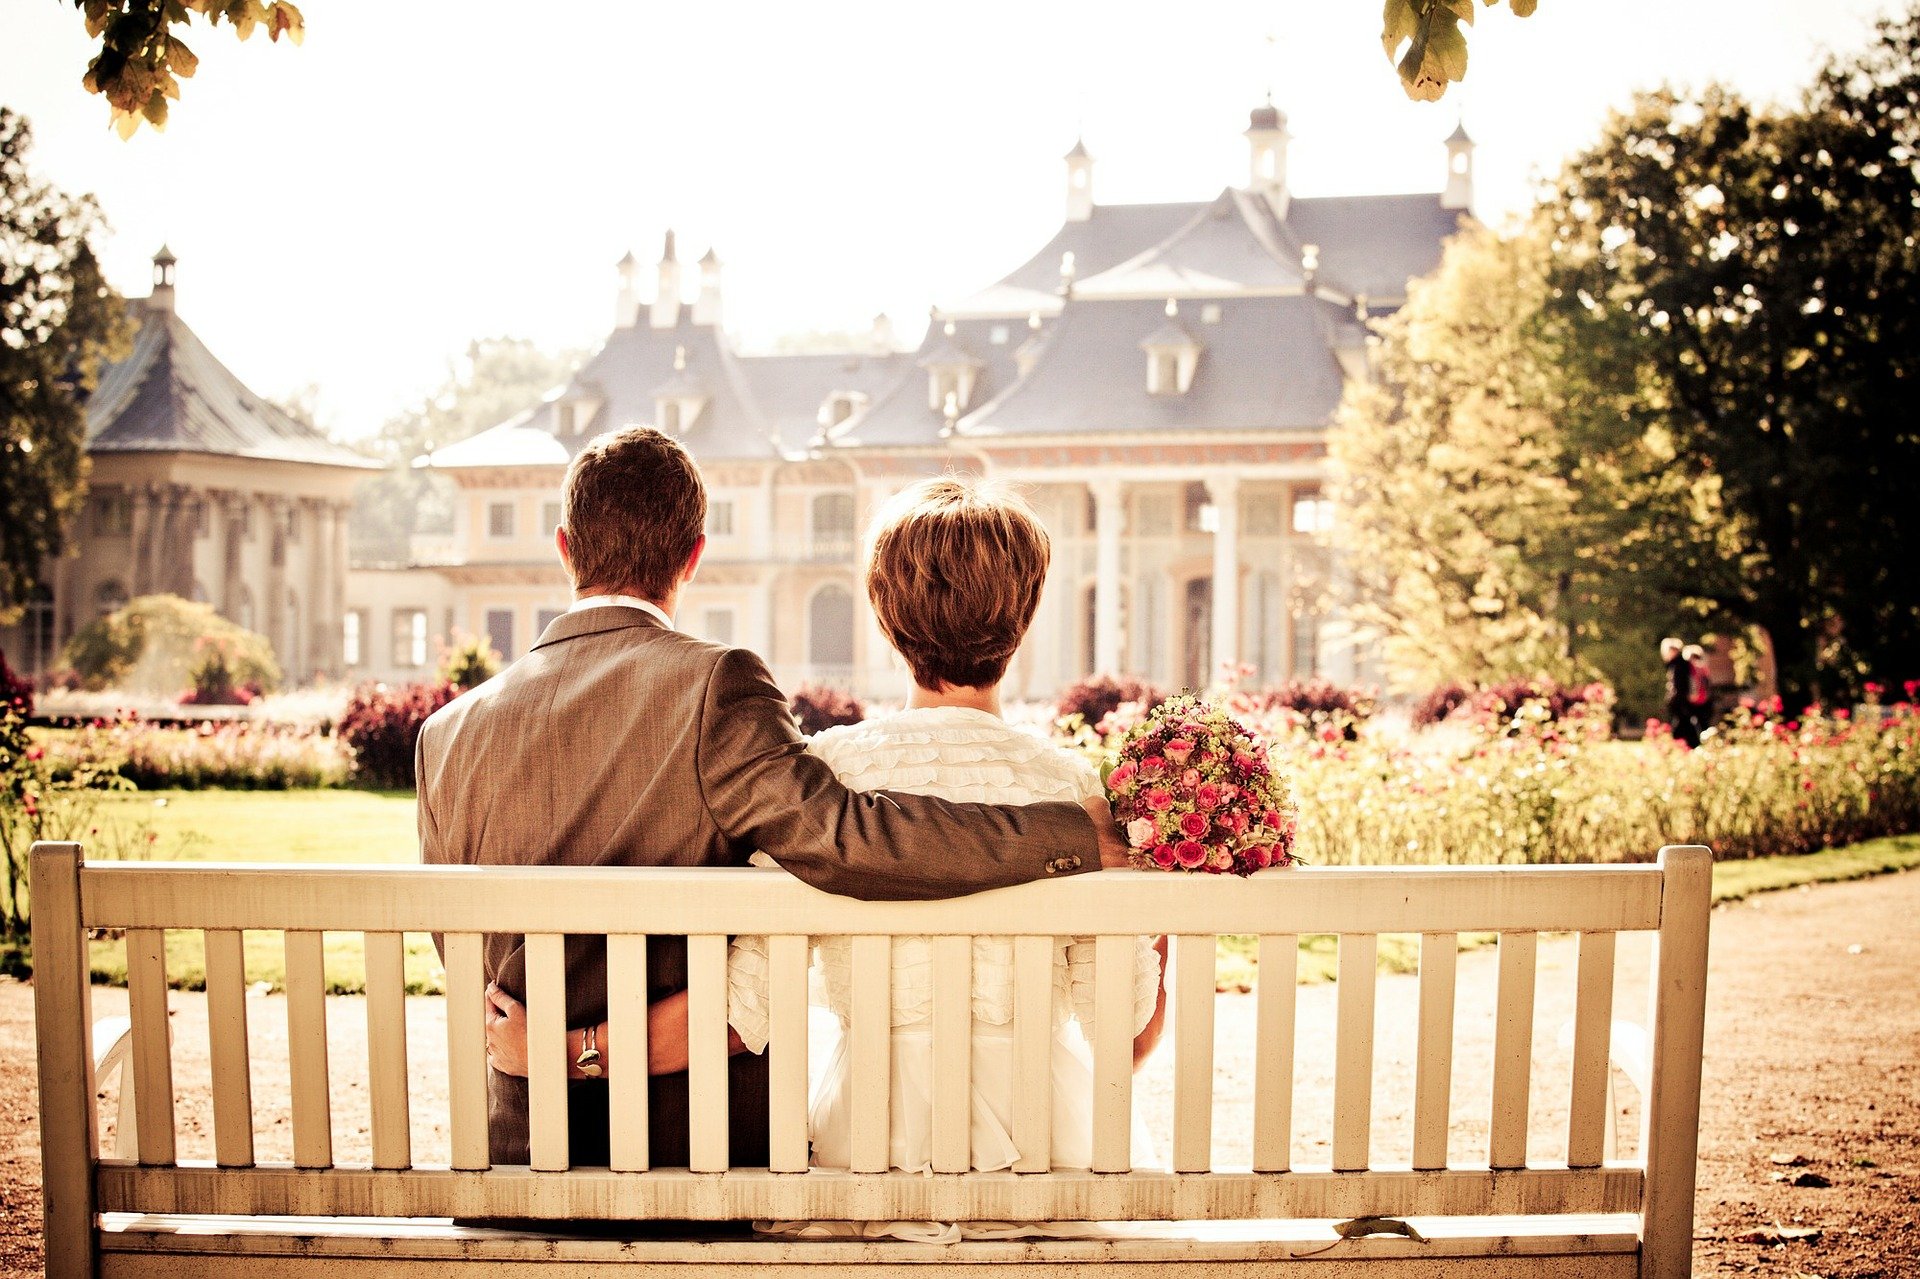 Couple sitting on a bench with their arms wrapped around each other | Source: Pixabay